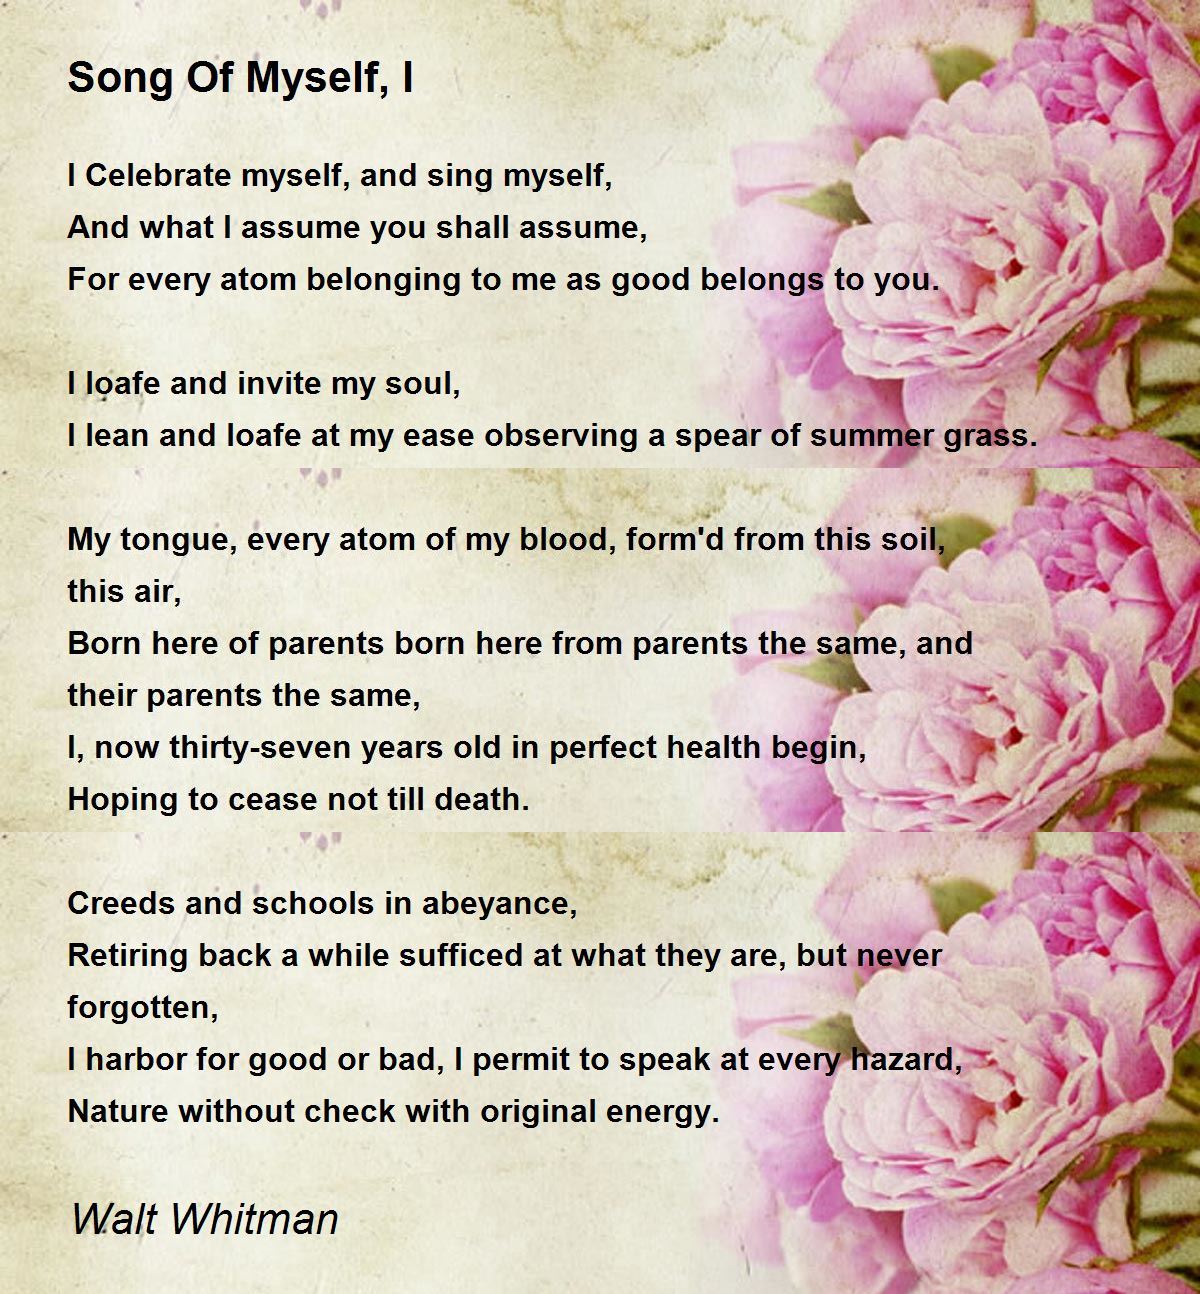 Song Of Myself, I Poem by Walt Whitman - Poem Hunter Comments